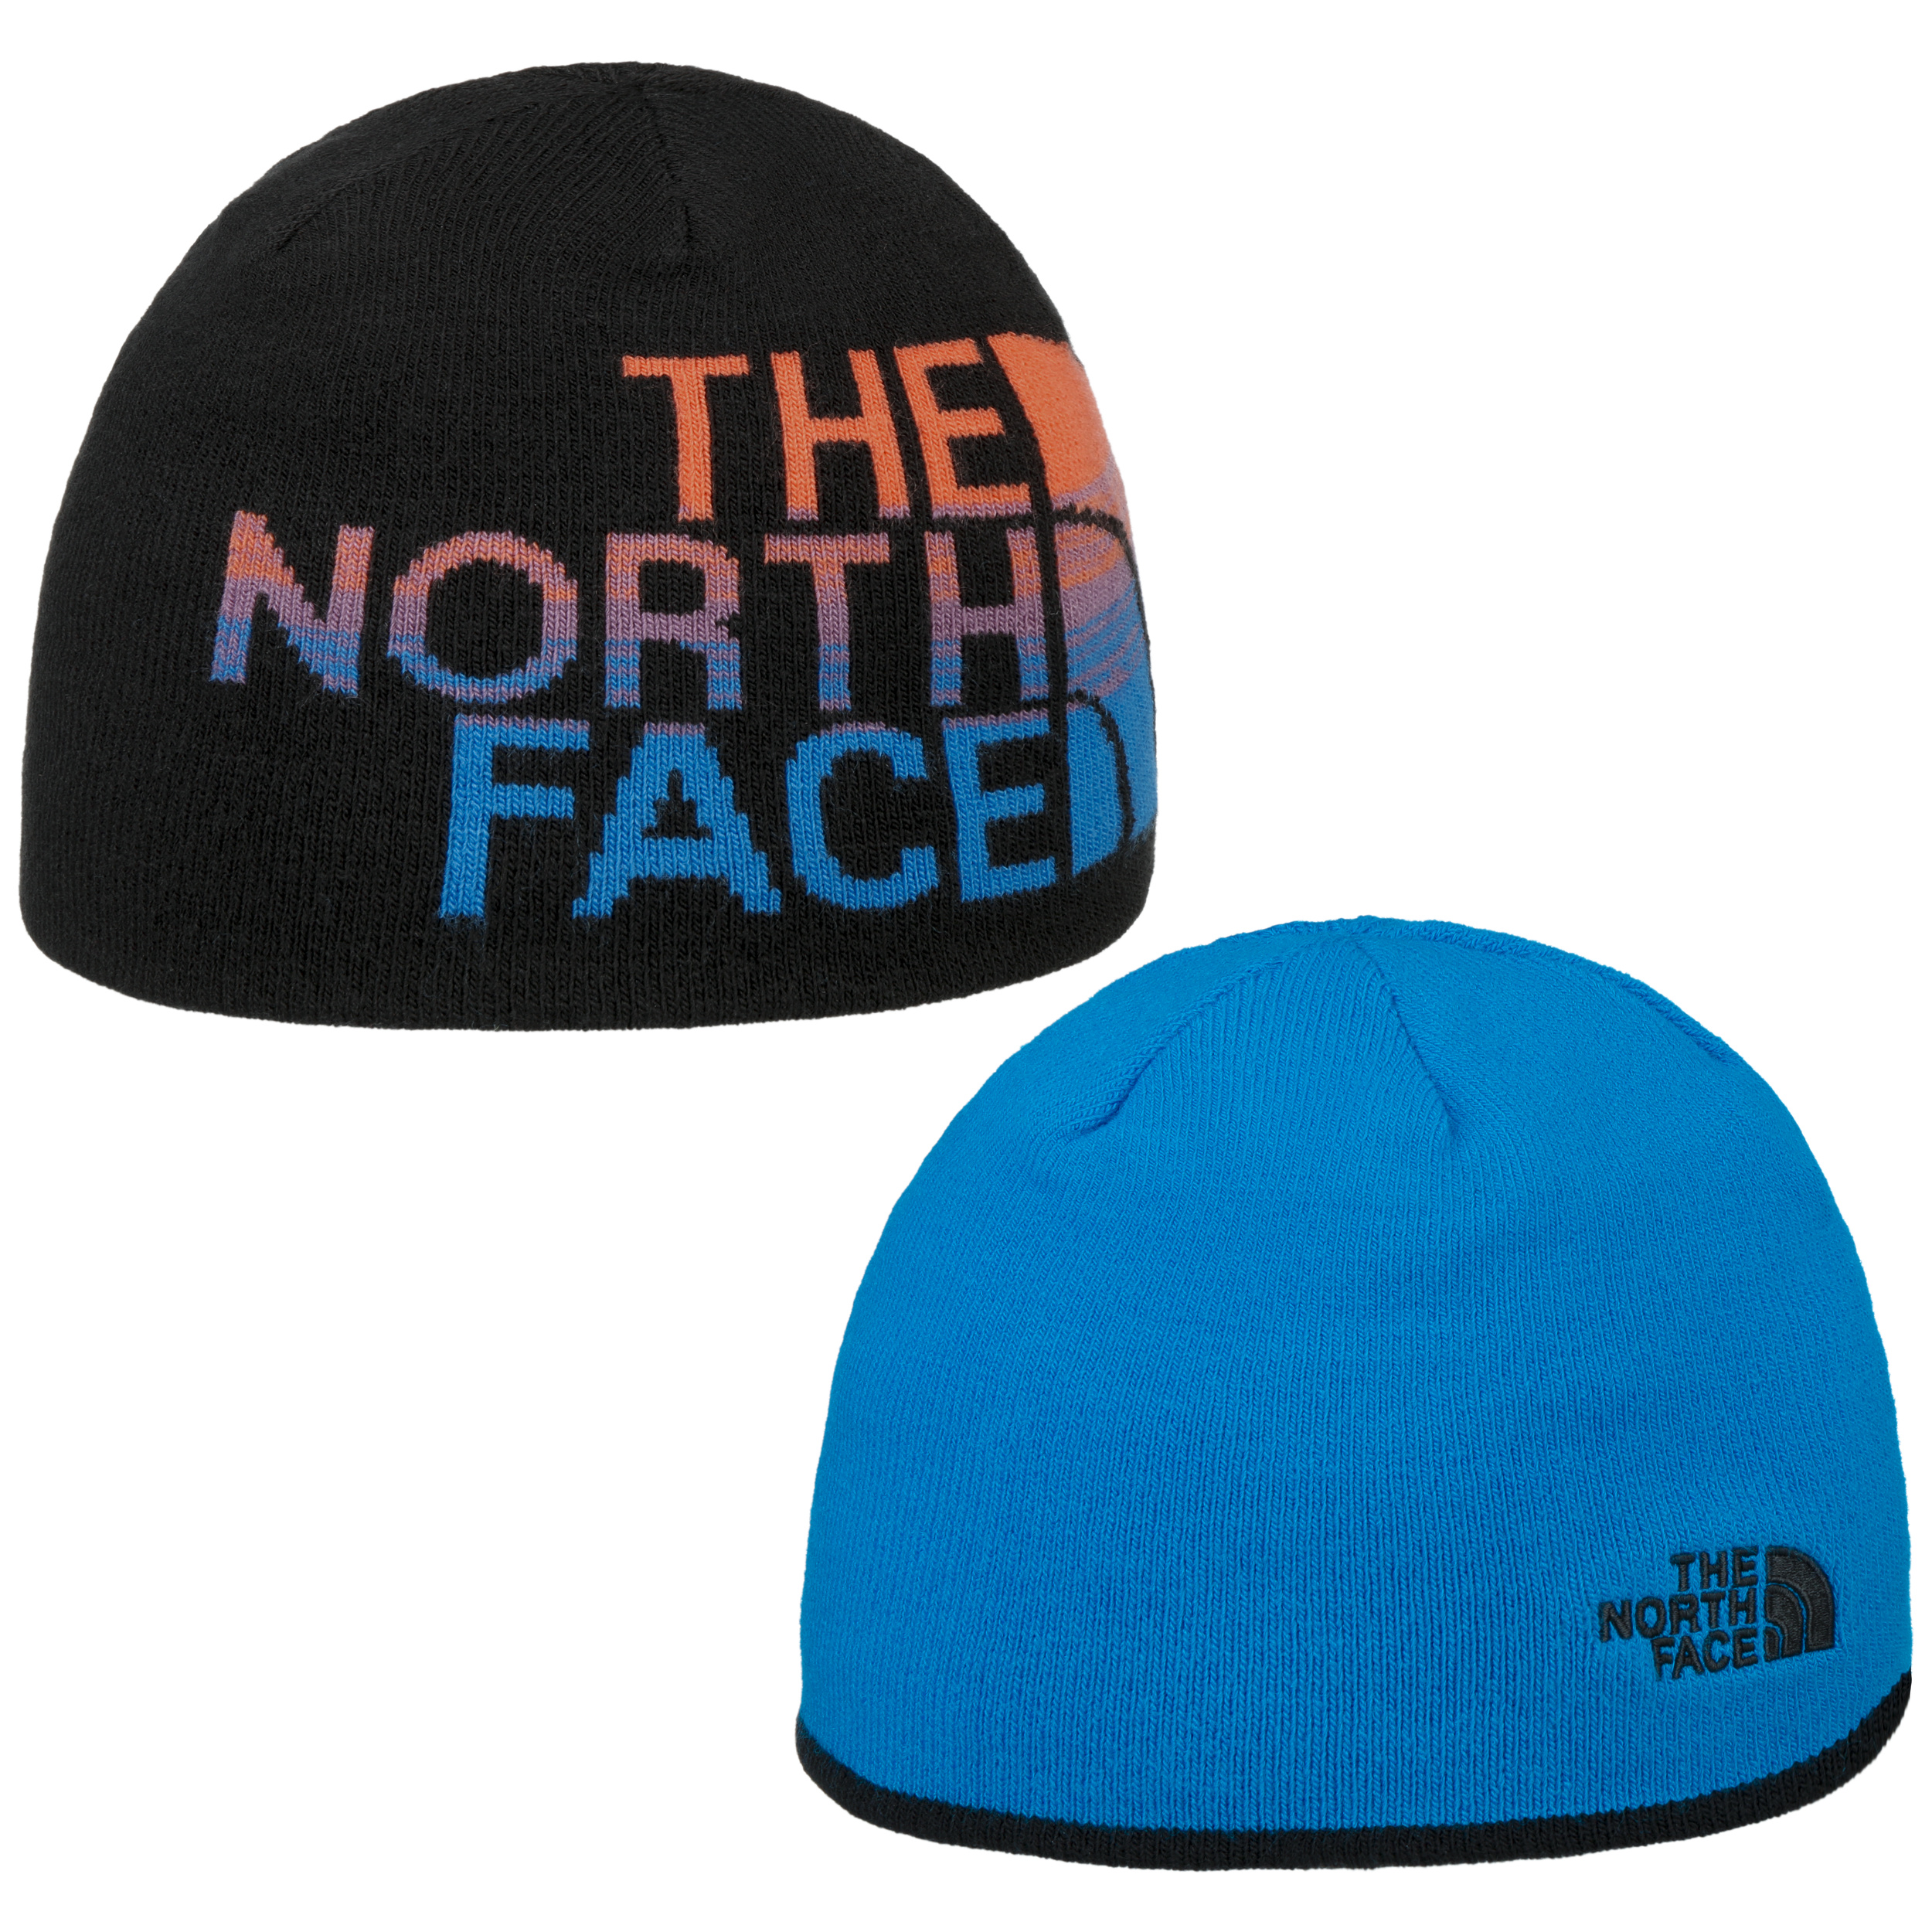 Rev Logo Beanie Hat by The North Face - 40,95 €